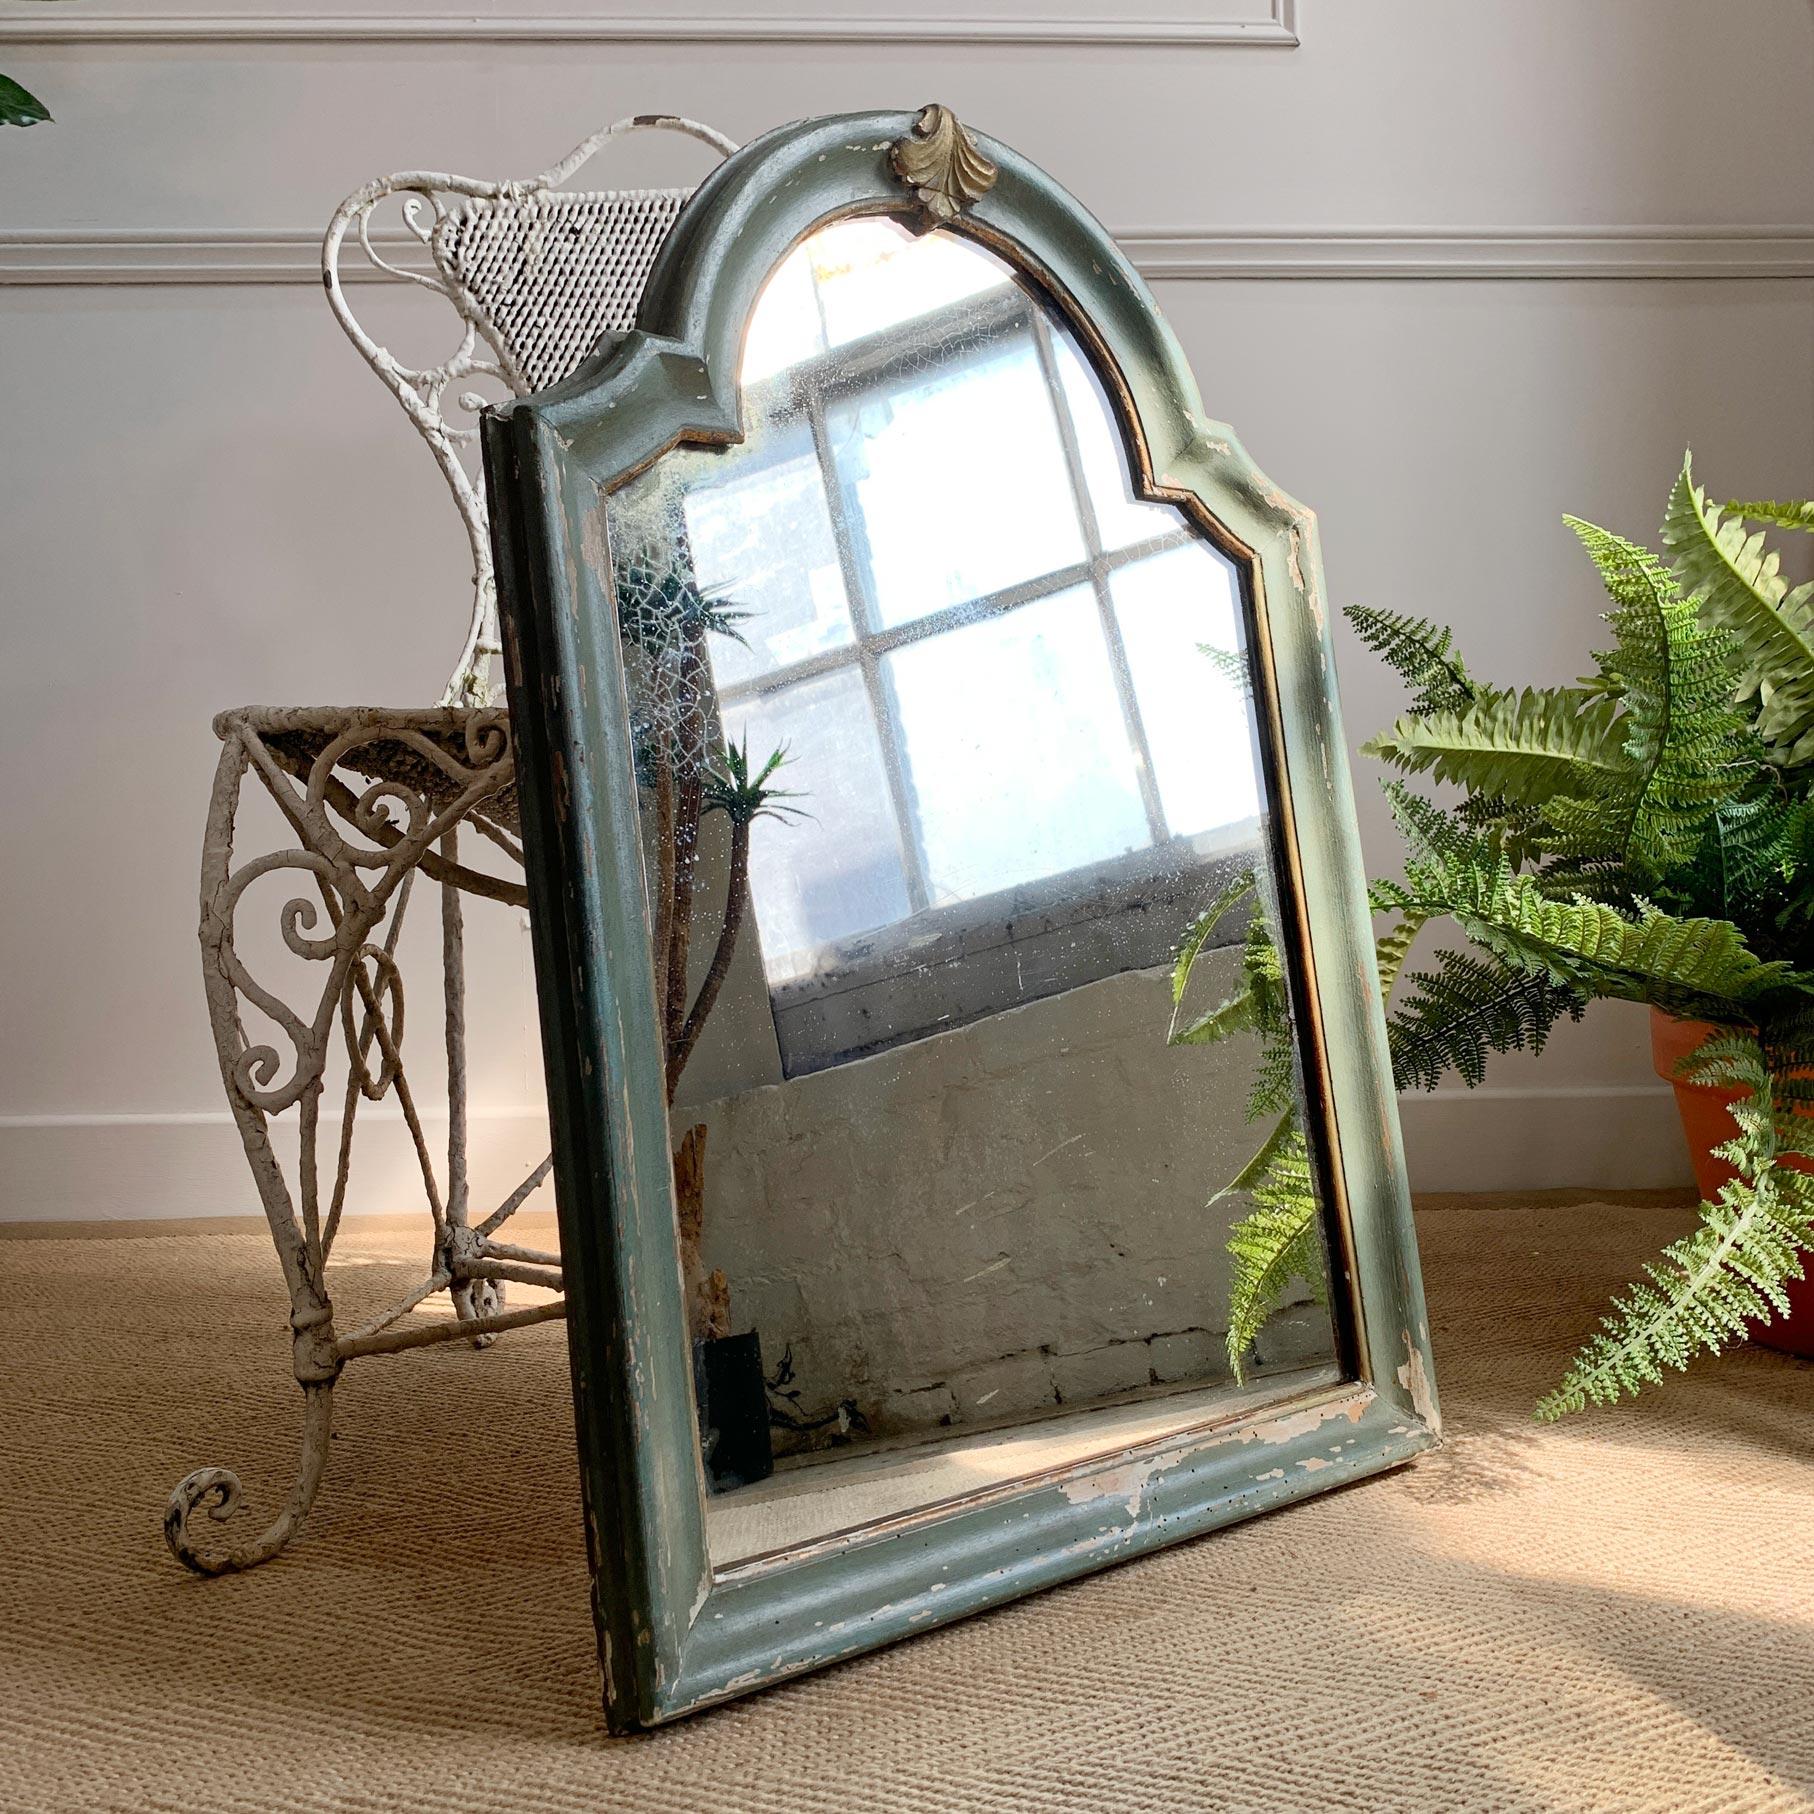 A beautiful 19th century French arch top mercury plate mirror, gesso over wood, then finished in a deep duck egg green with a gilt leaf decorative element and gilt banding to the interior of the frame.

The mercury plate has wonderful foxing with a